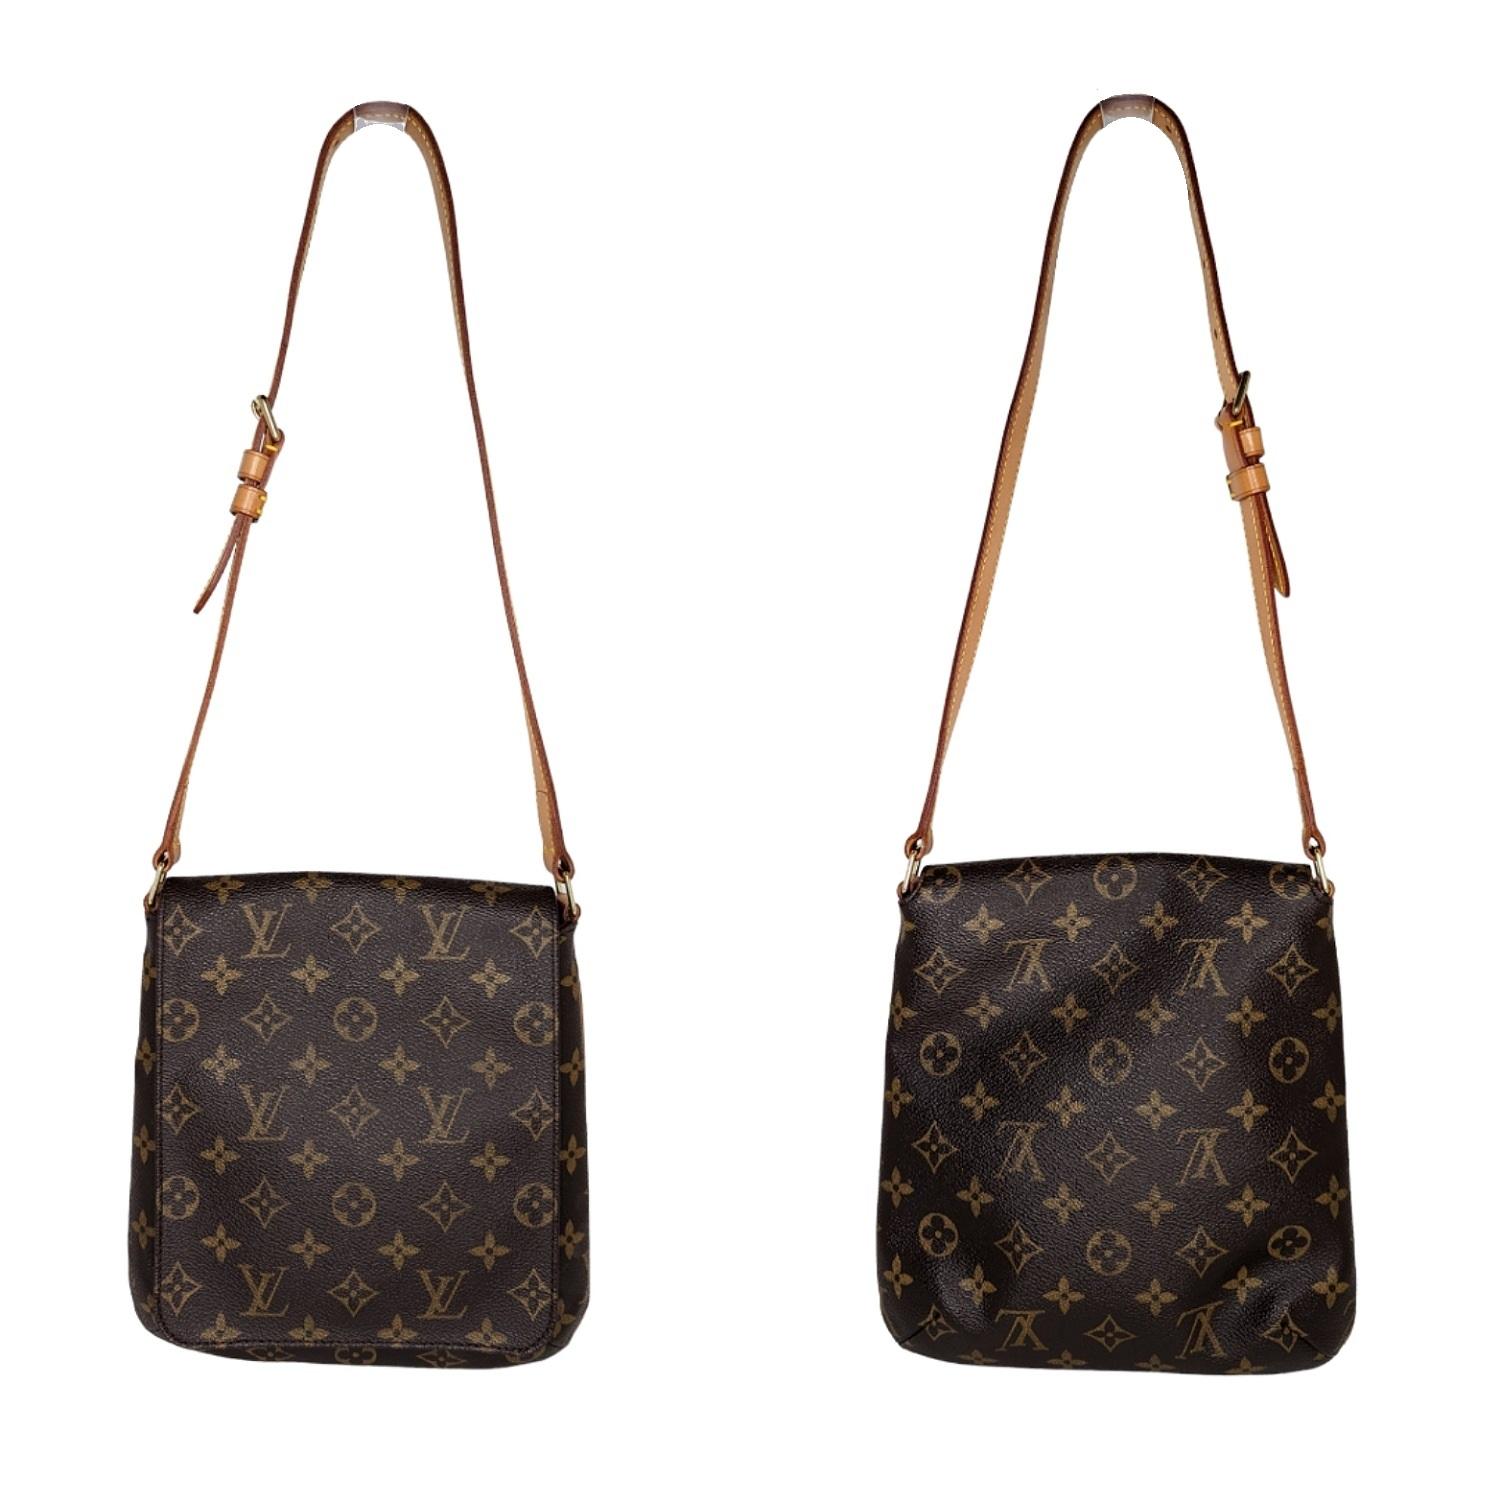 The Louis Vuitton Monogram Canvas Musette bag is an elegant and sleek looking bag. It comes with a versatile adjustable leather shoulder strap and a flap top closure that tucks comfortably under the arm. Perfect if you're looking for something